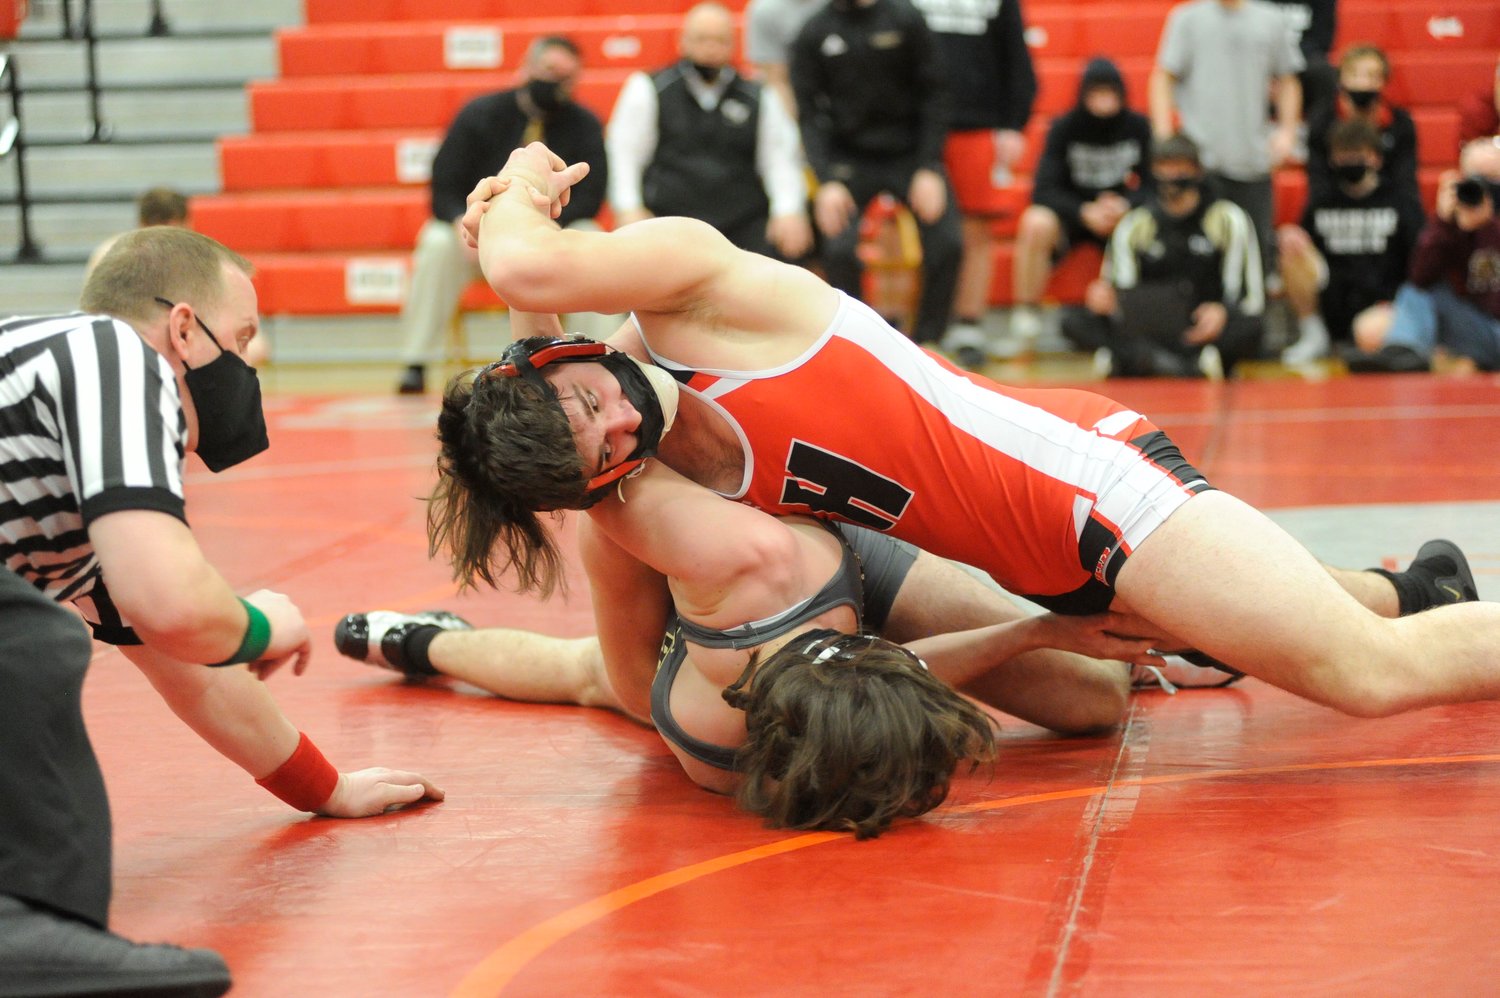 Honesdale’s Tim Dailey won by a 11-7 decision over Kasen Taylor of Western Wayne on Friday, January 29 at “The Home of the Hornets.” The Hornets posted a 50-21 victory in their first game of the season.